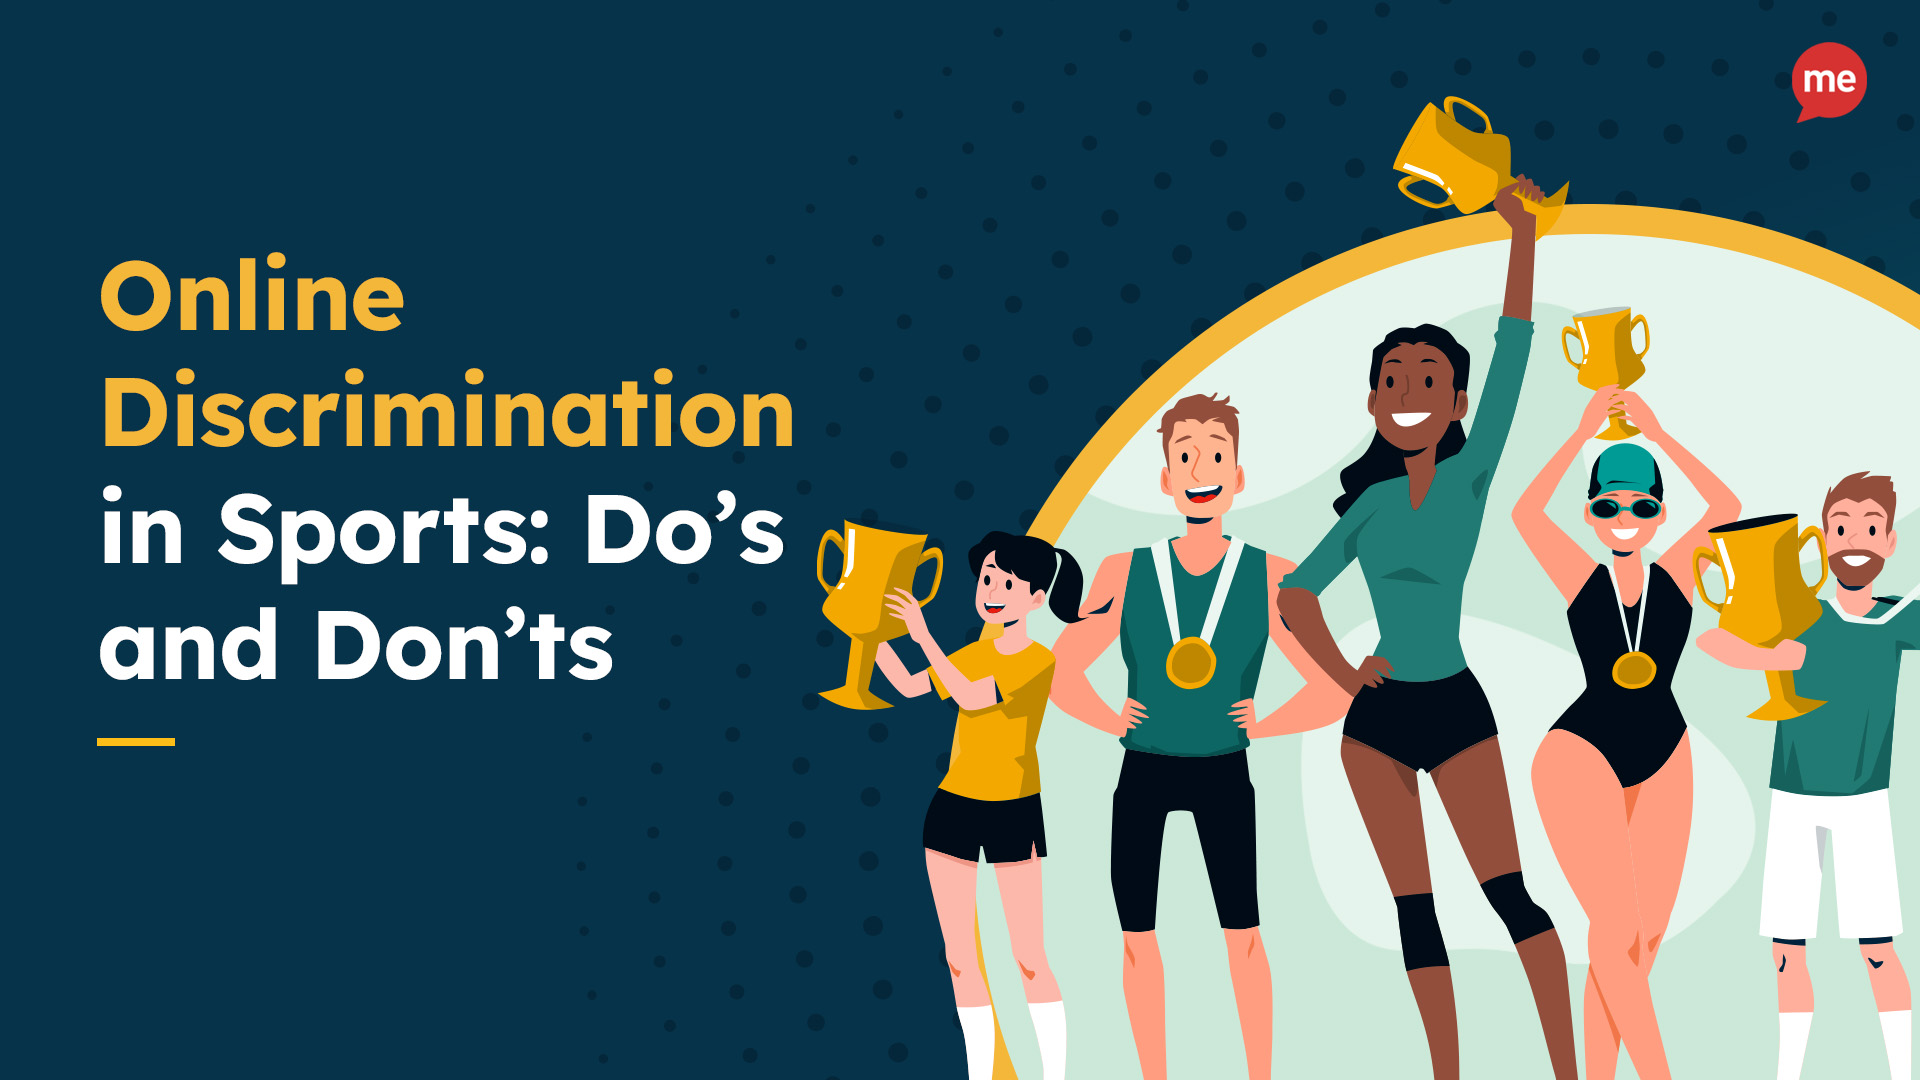 Online Discrimination in Sports: Do's and Don'ts